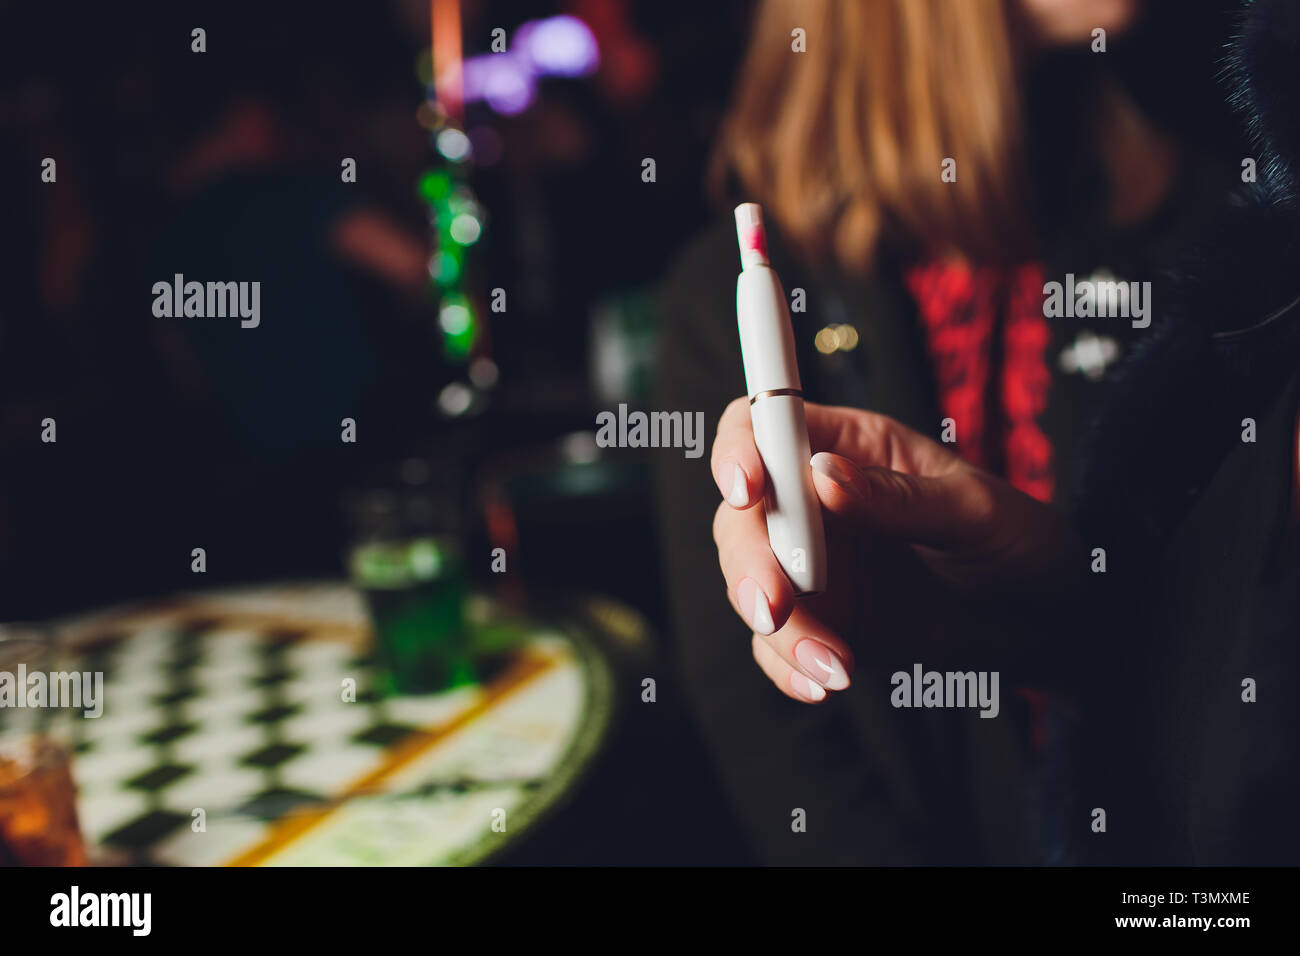 Electronic cigarettes, technology cigarette. Tobacco system IQOS. female hand on blurred background of restaurant Stock Photo